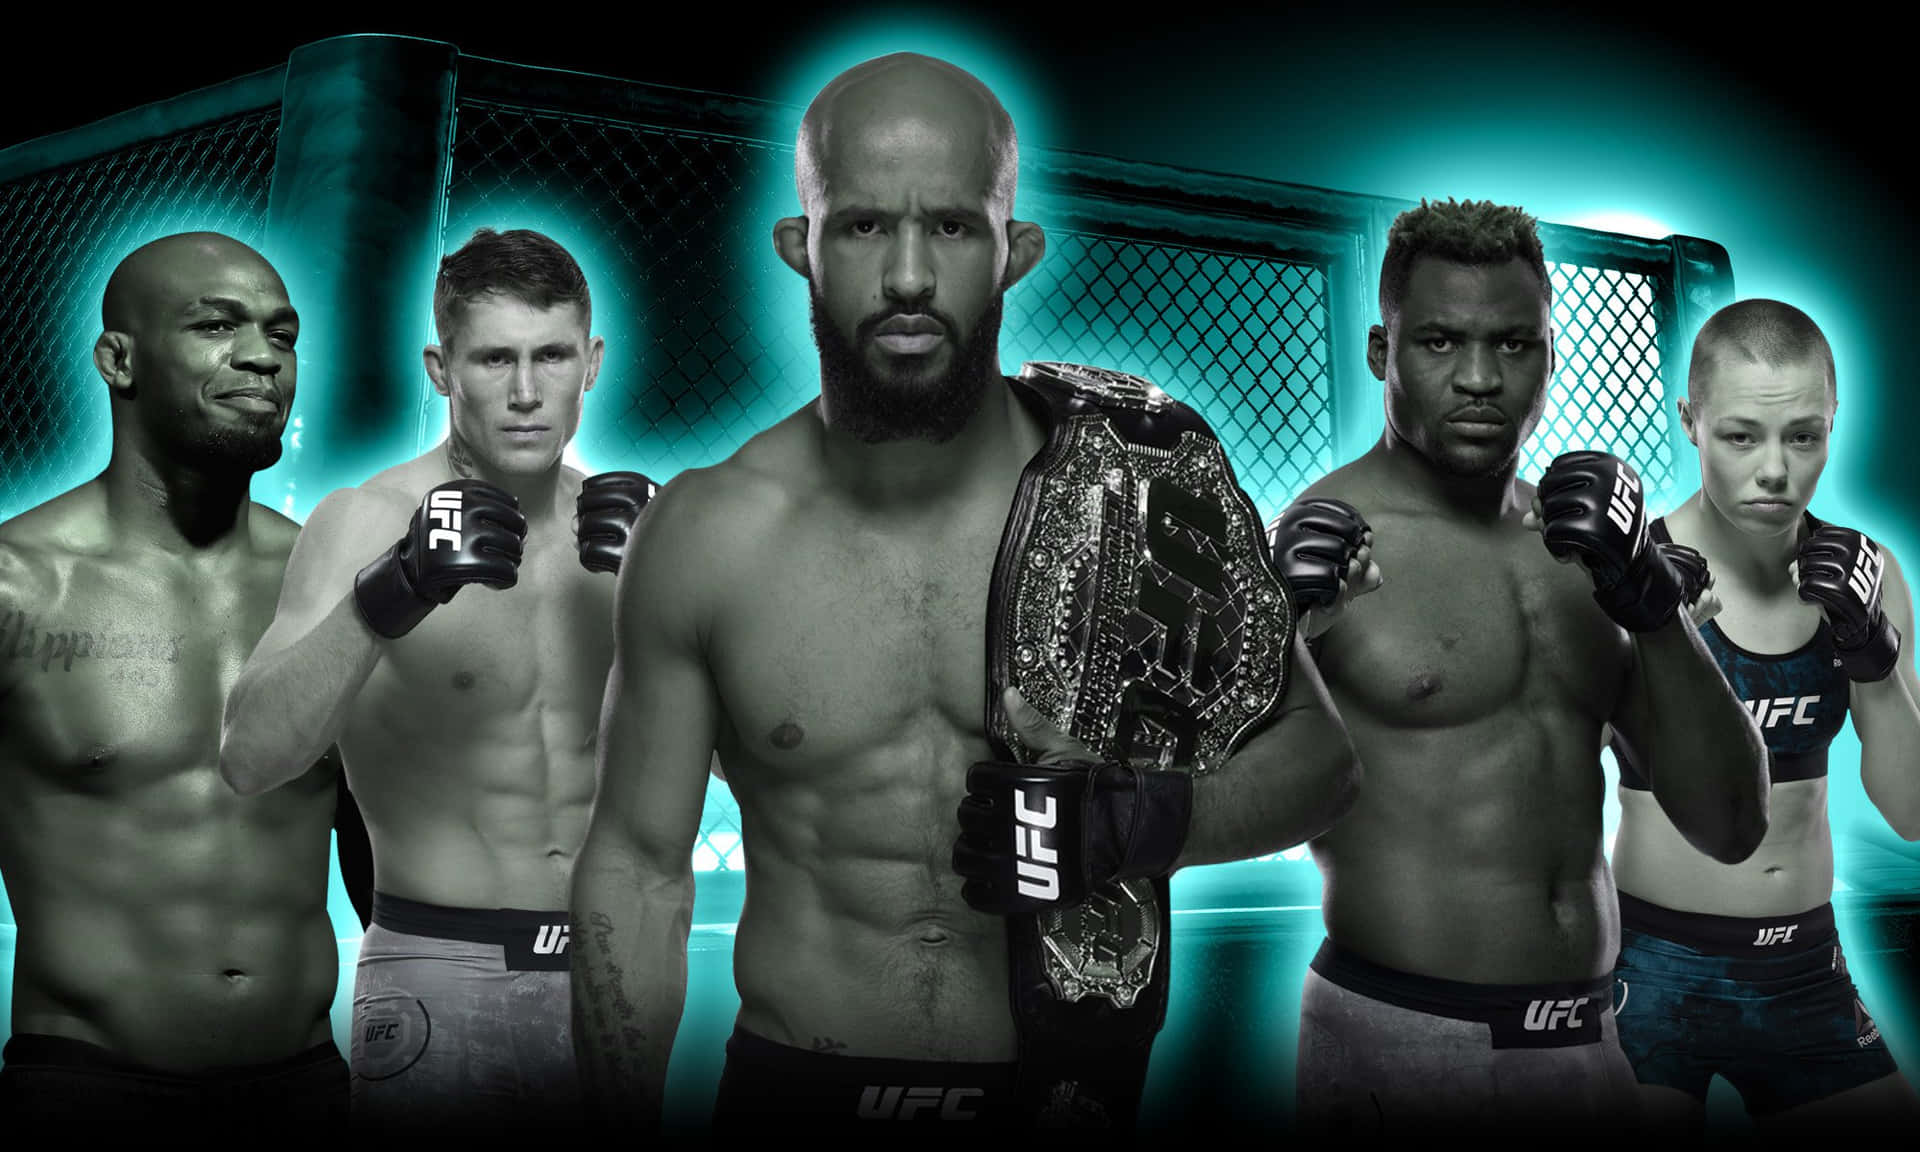 Download Demetrious Johnson With Mma Fighters Poster Wallpaper